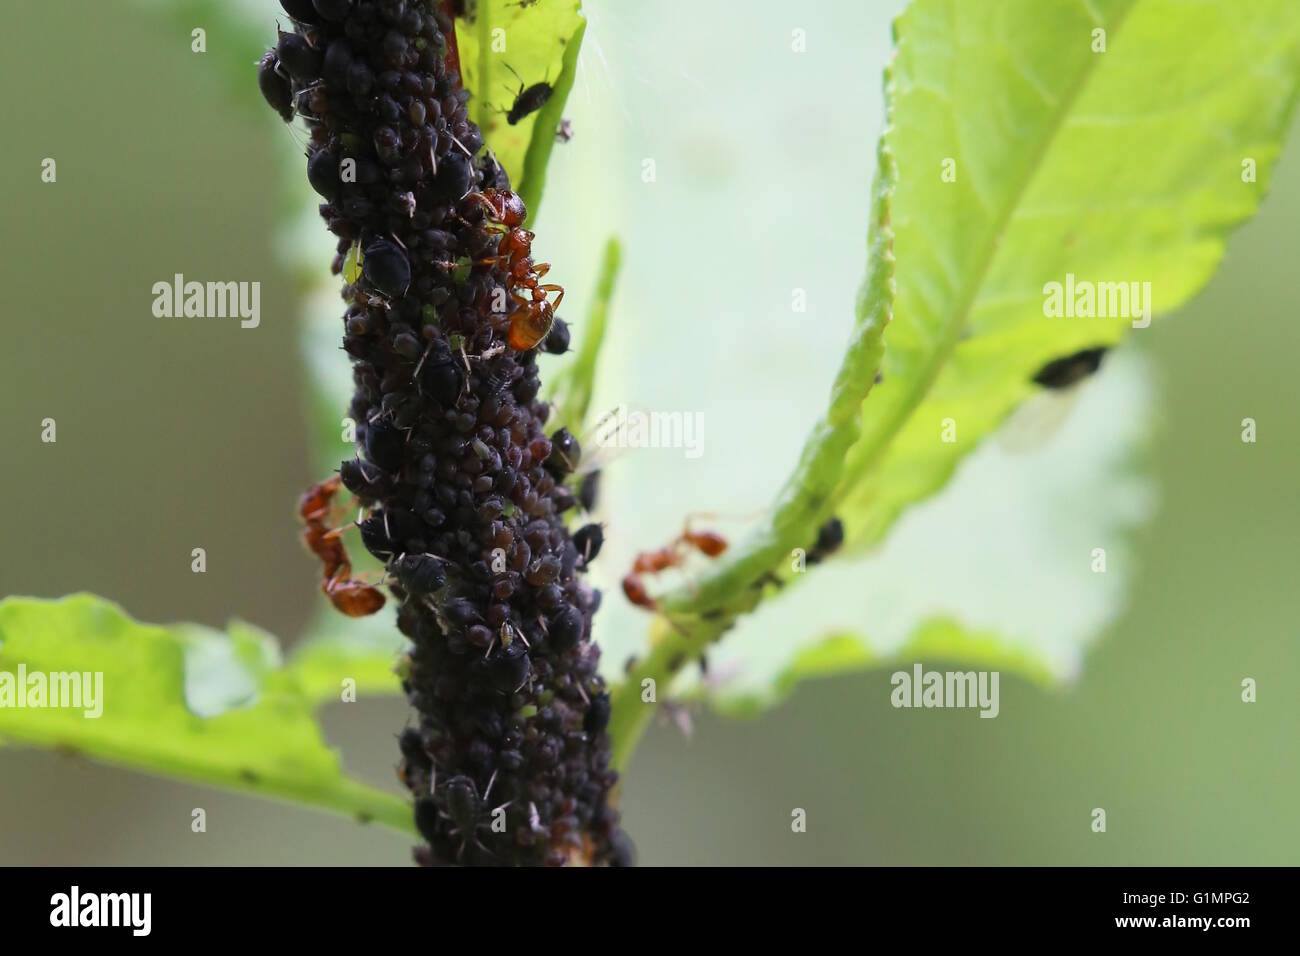 Aphids on a plant, herded by European fire ants (Myrmica rubra). Stock Photo